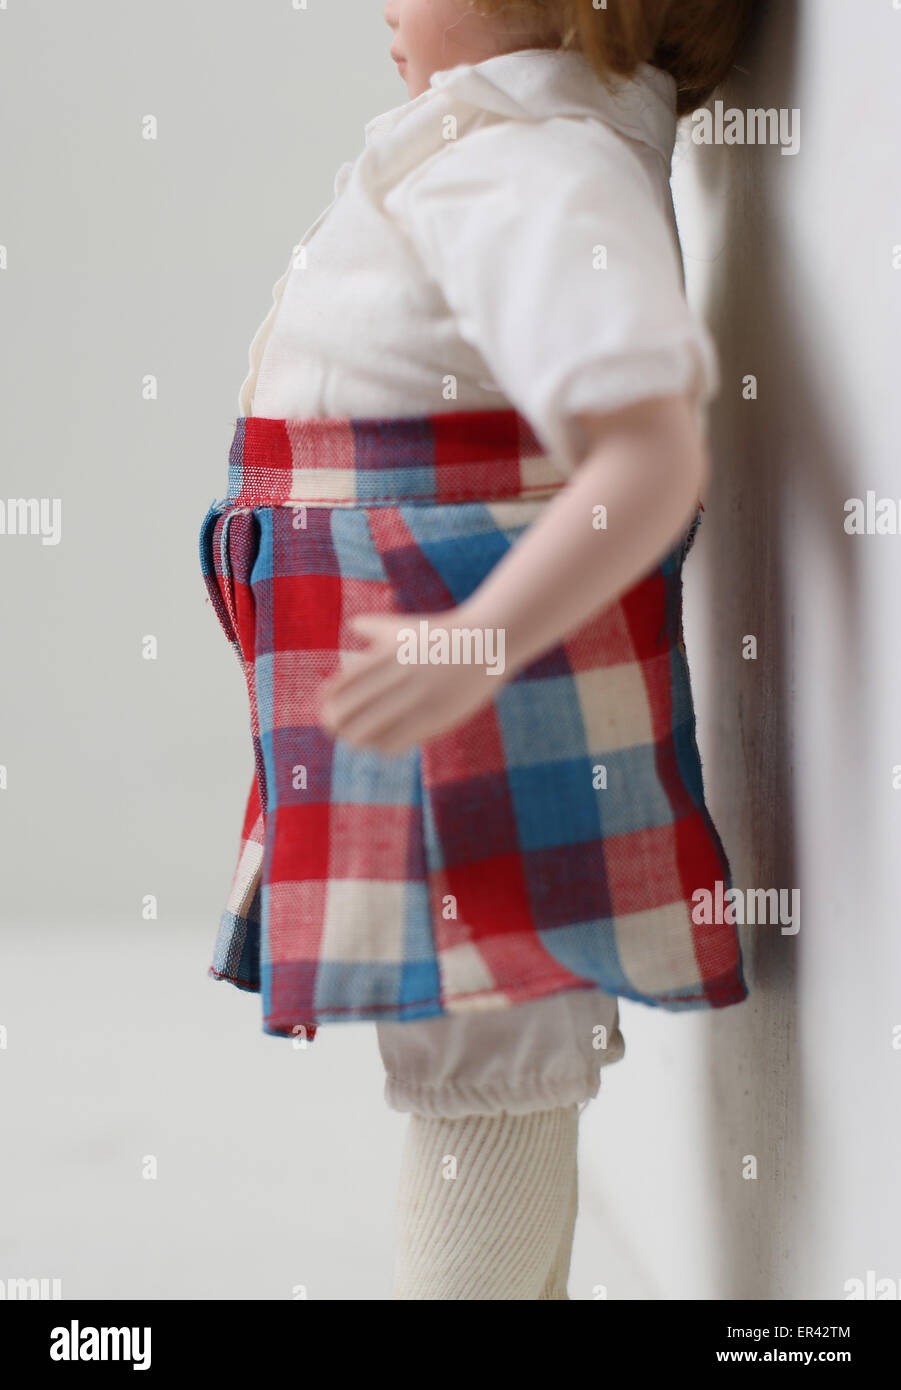 A side view of an overweight female doll. Stock Photo